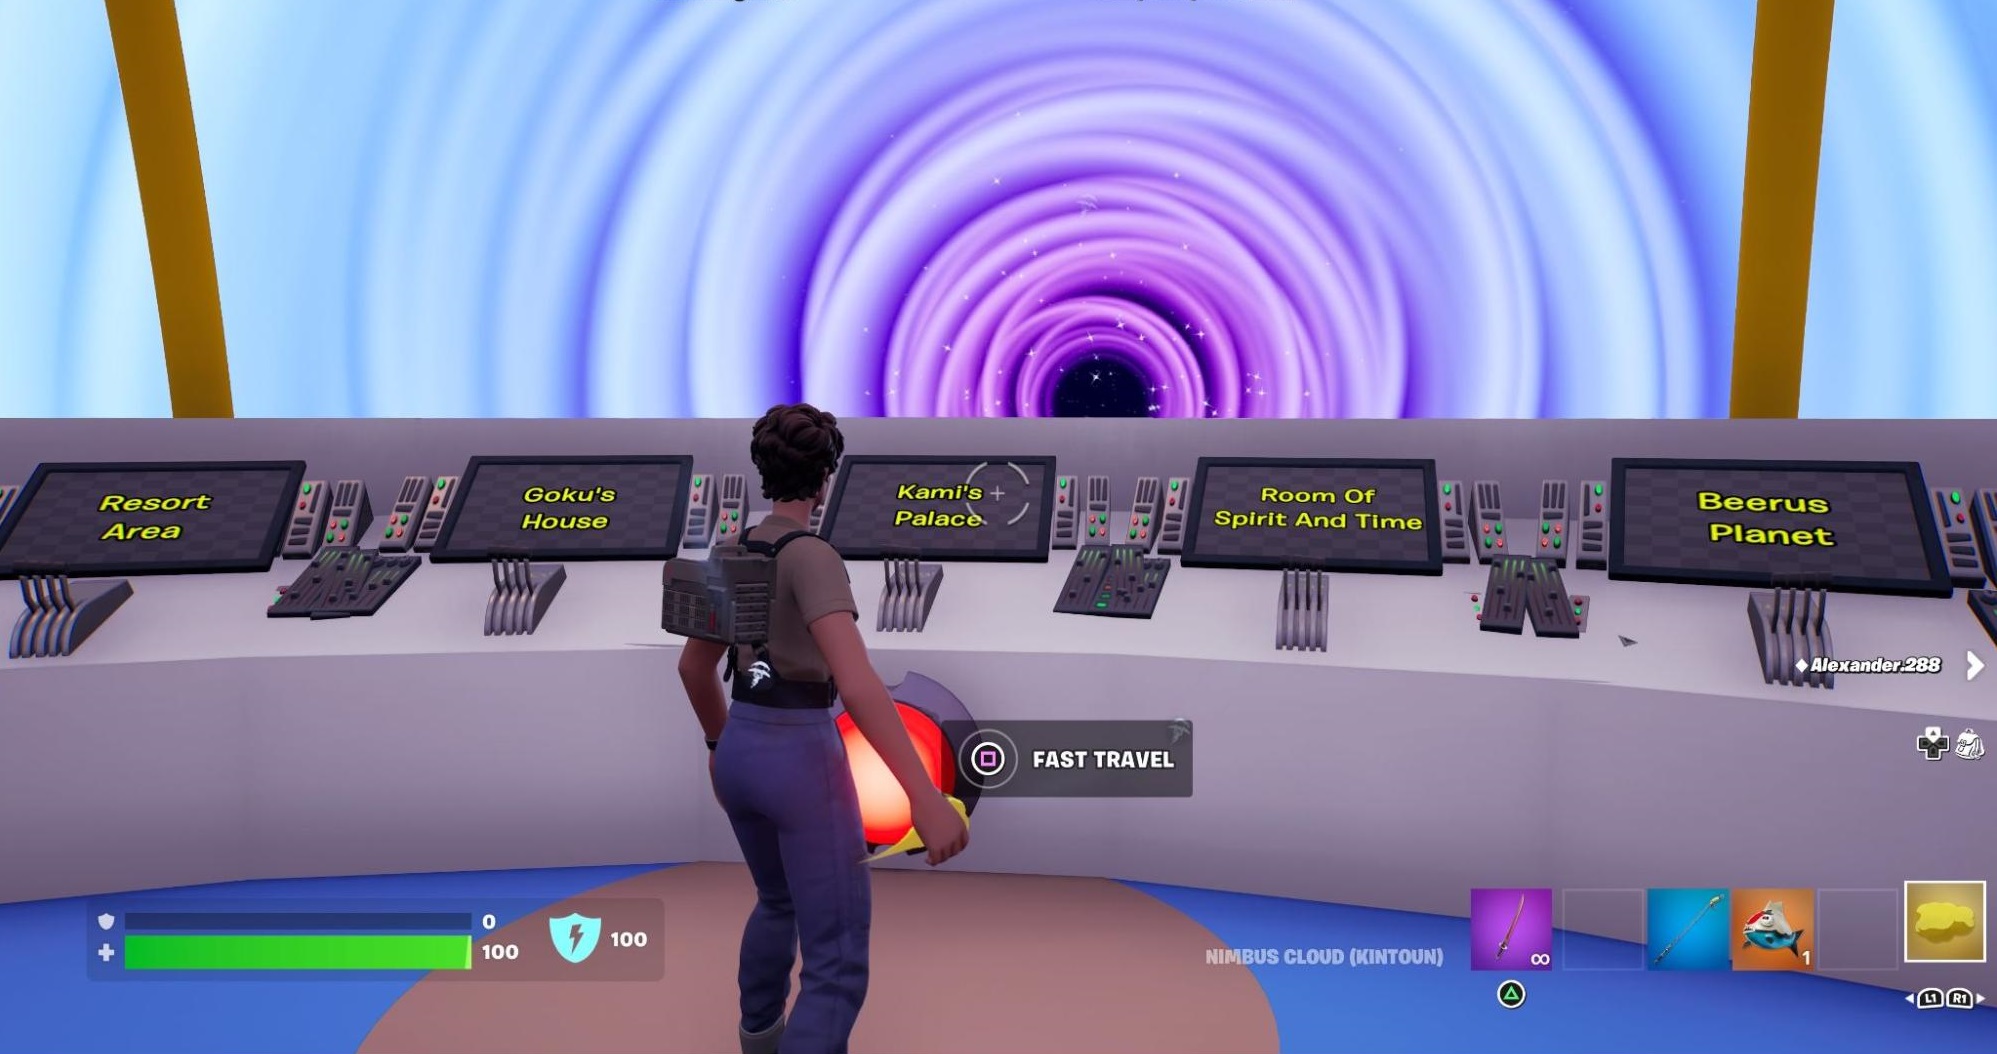 A player stands at a control panel with screens showing the names of each Dragon Ball themed area on a Fortnite map.